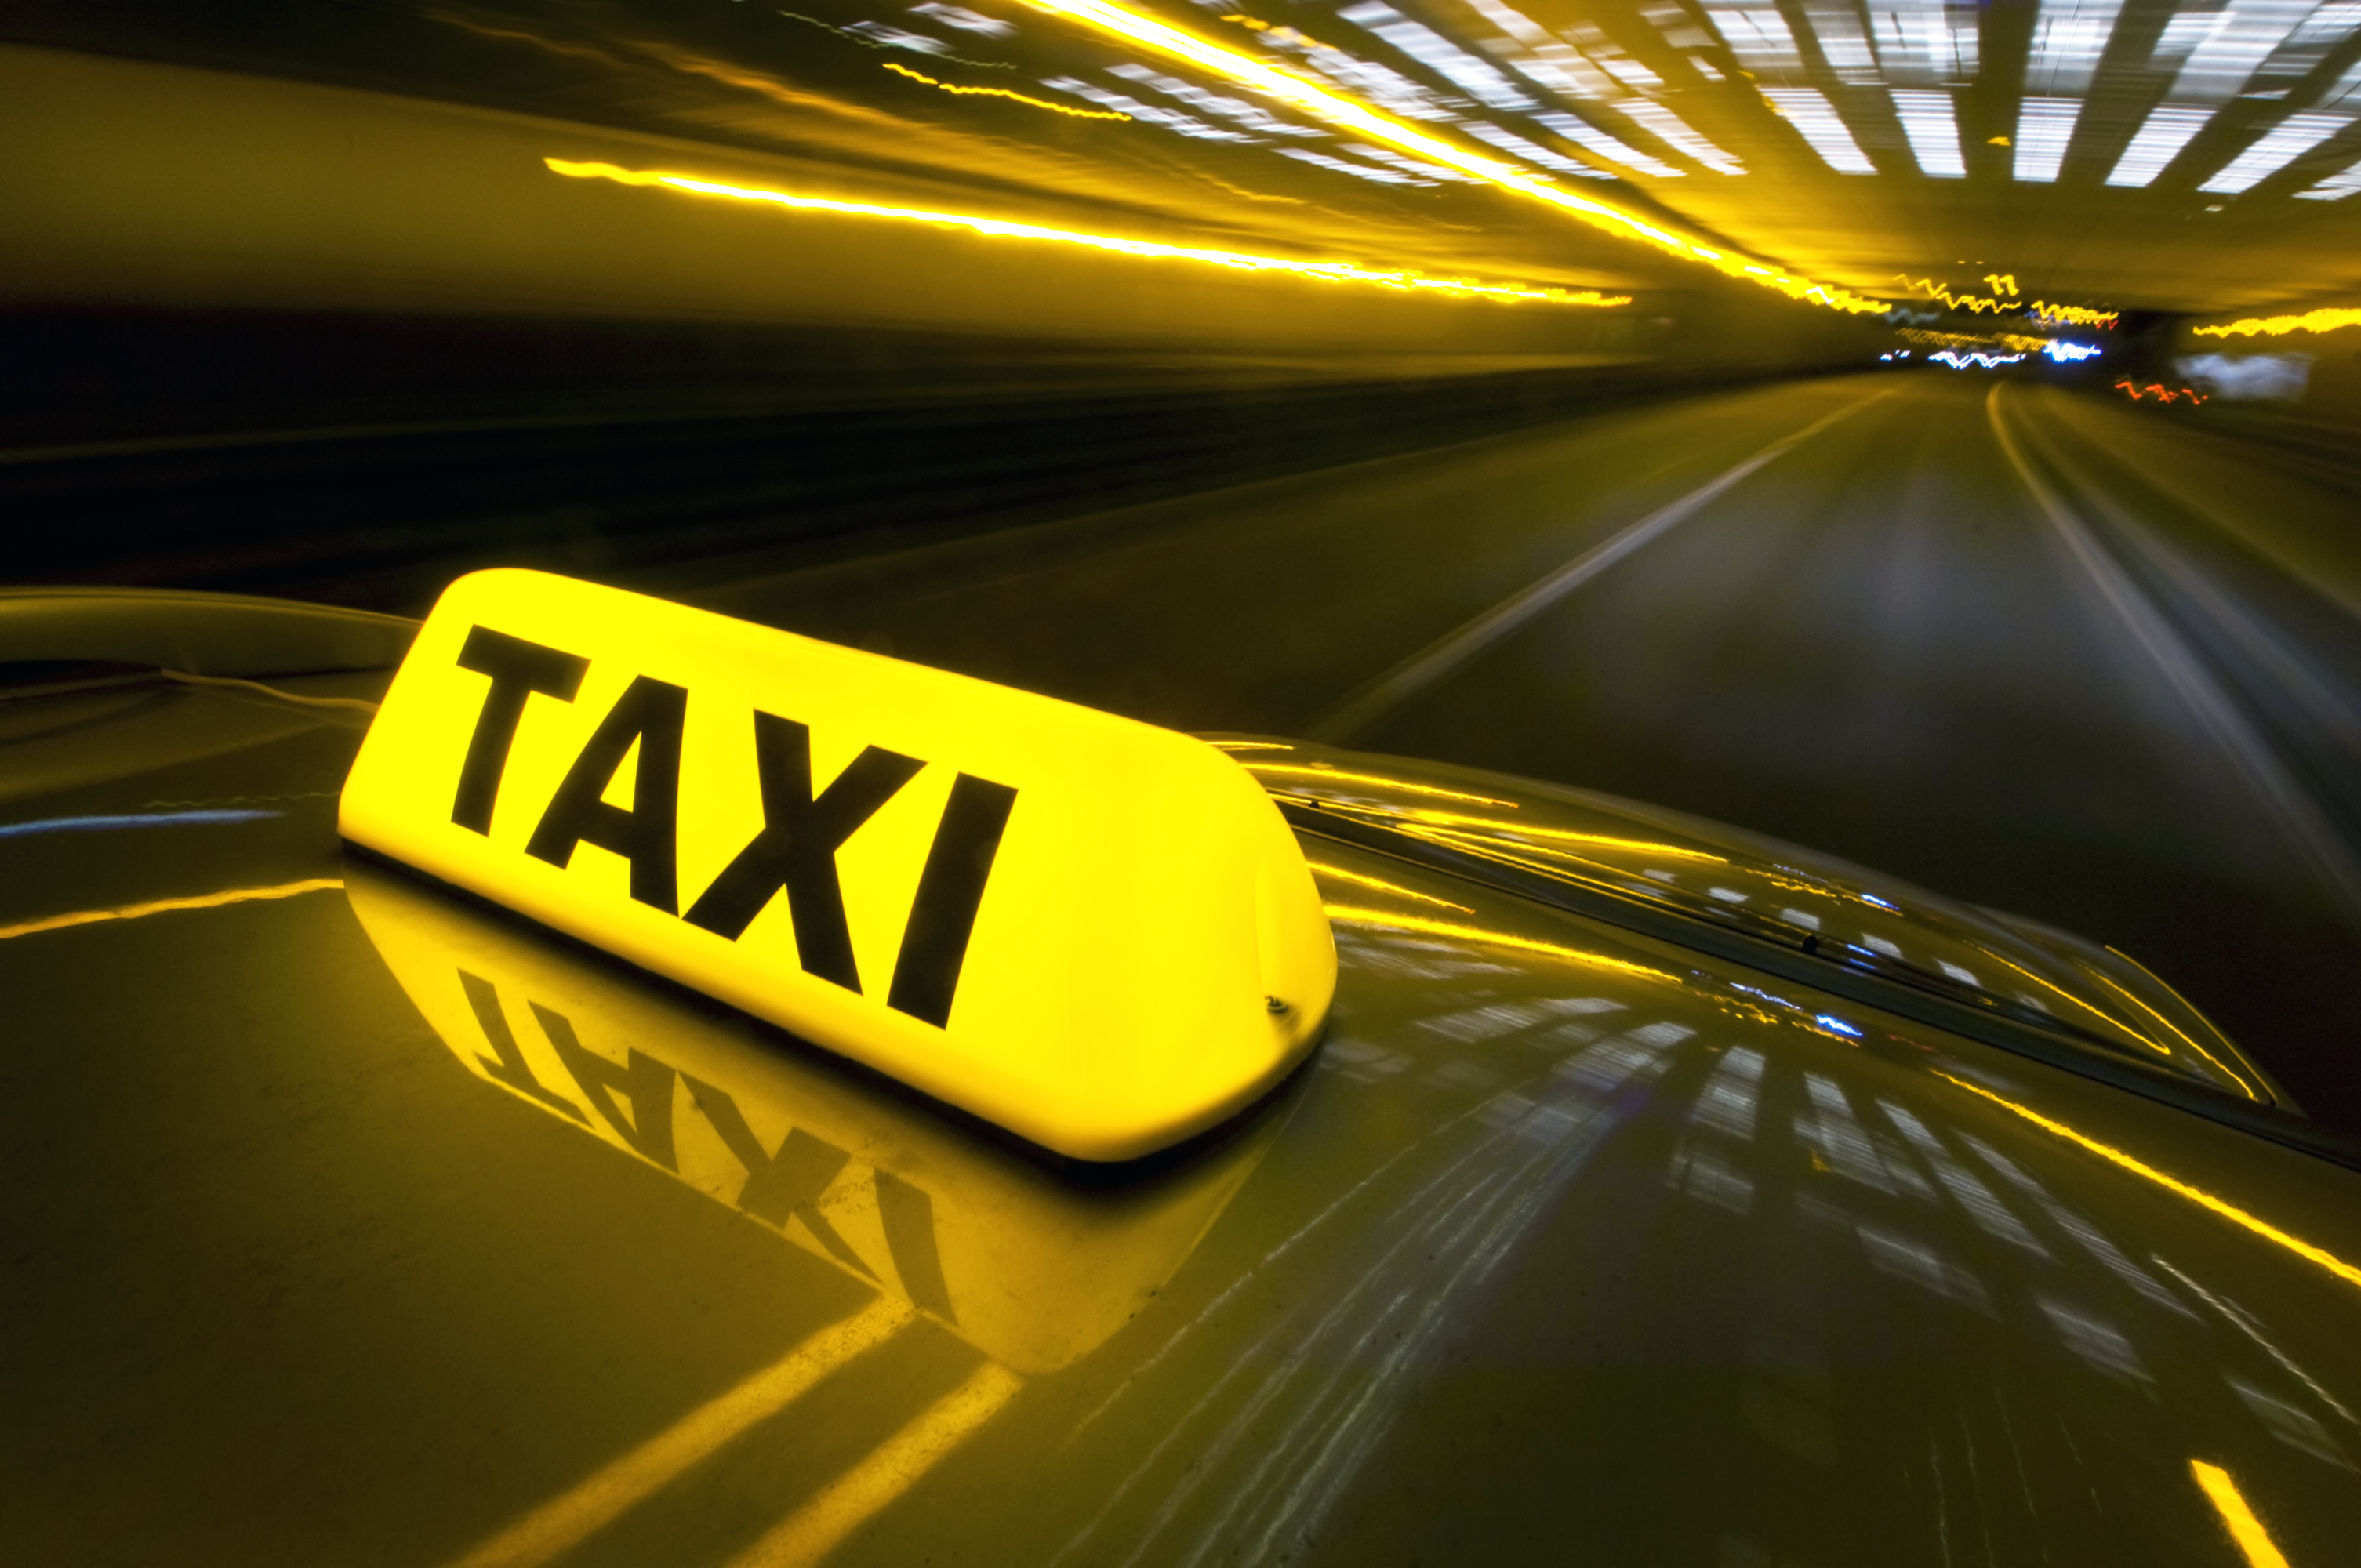 Another taxi hailing app to launch in Kenya